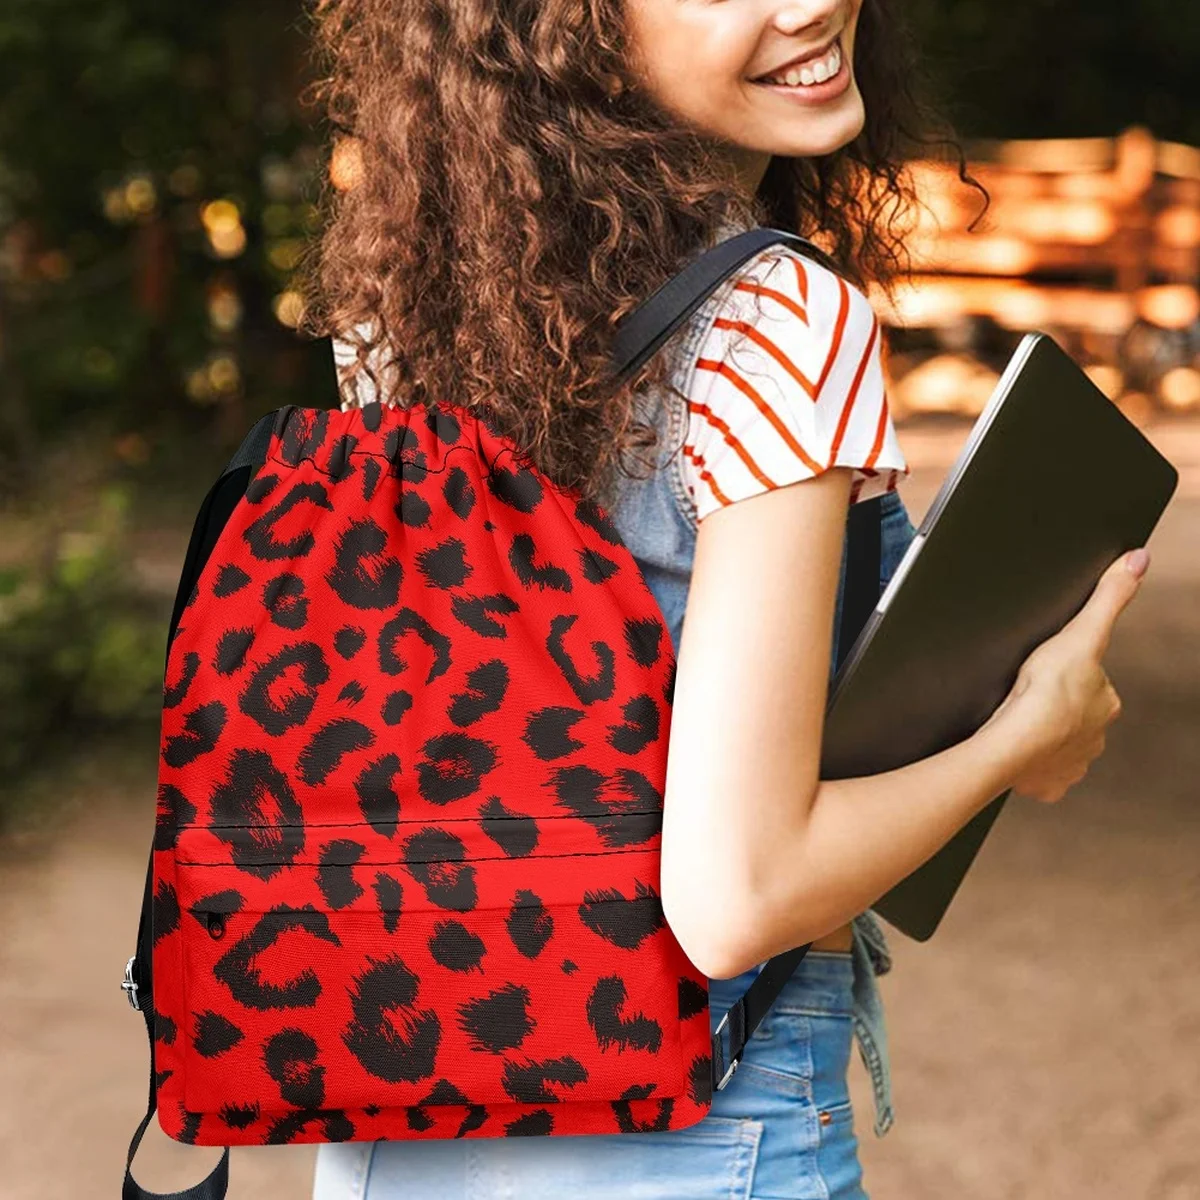 Red Leopard Print Drawstring Backpack for Women Casual Yoga Gym Shoulder Bags Foldable Canvas School Bags for Children Back Pack